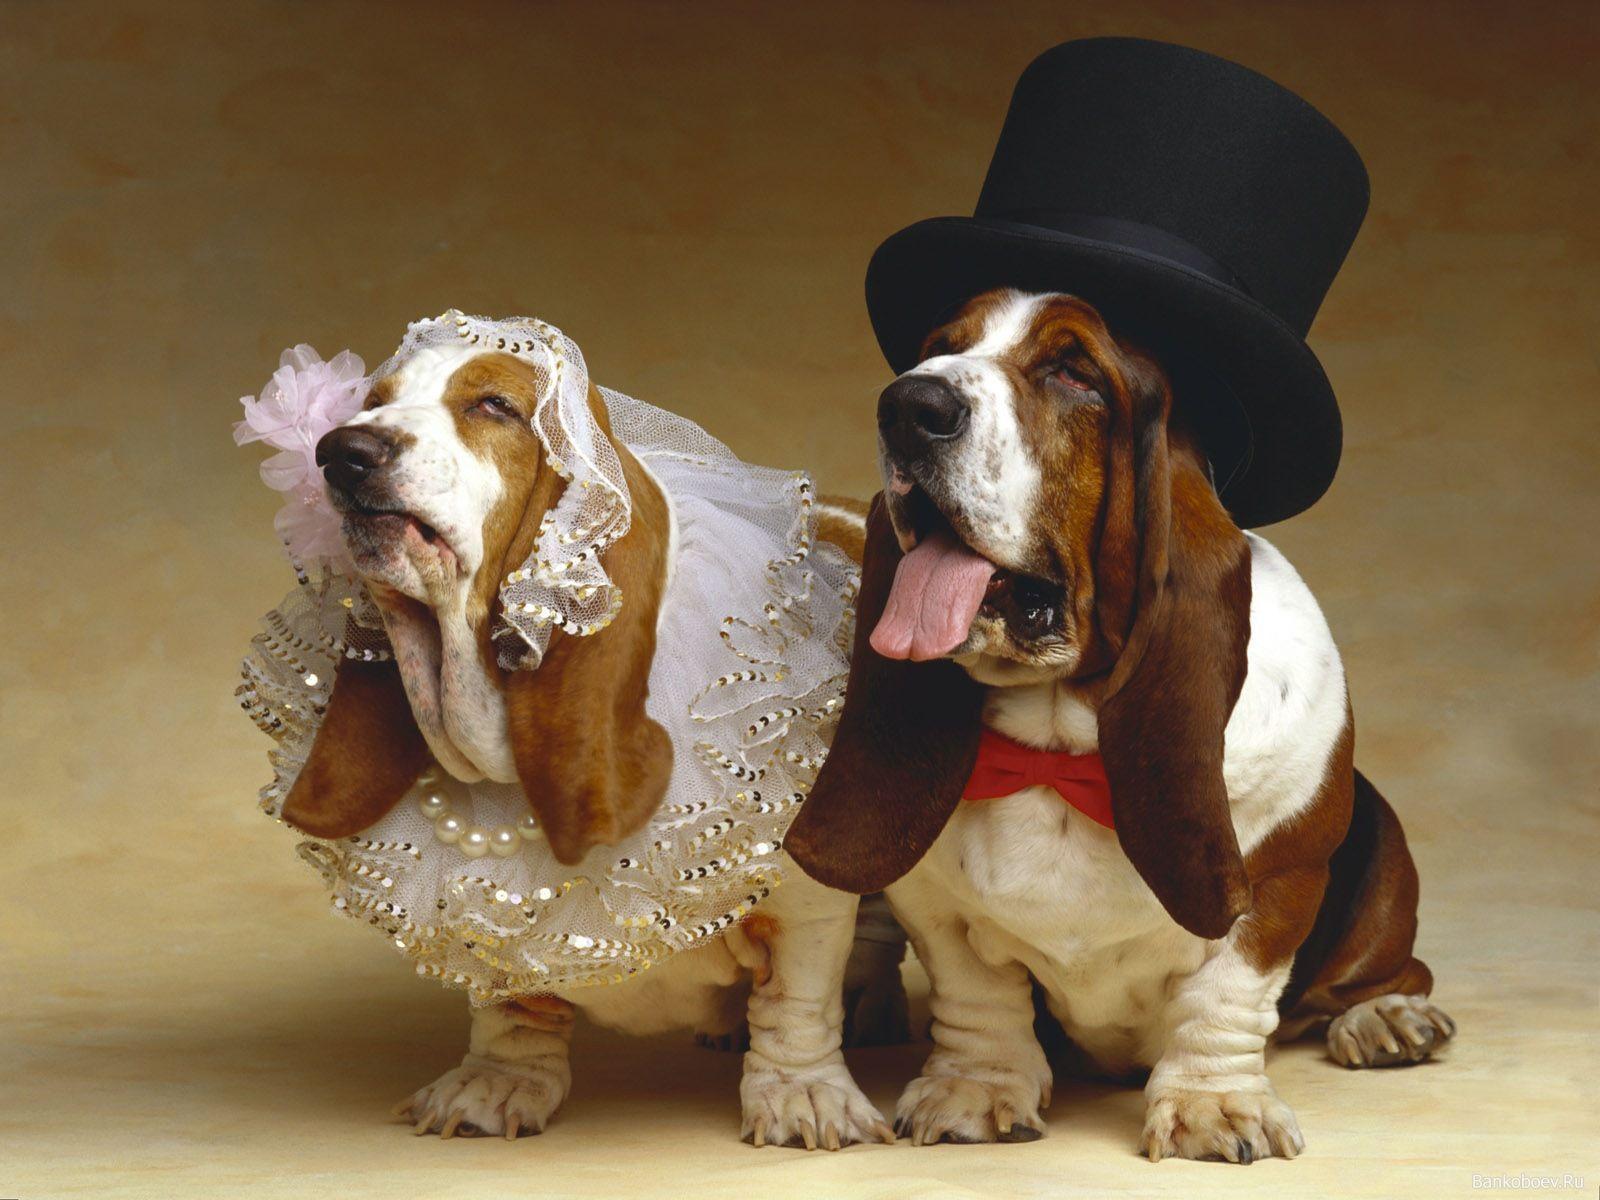 Basset Hound, the bride and groom wallpaper and image